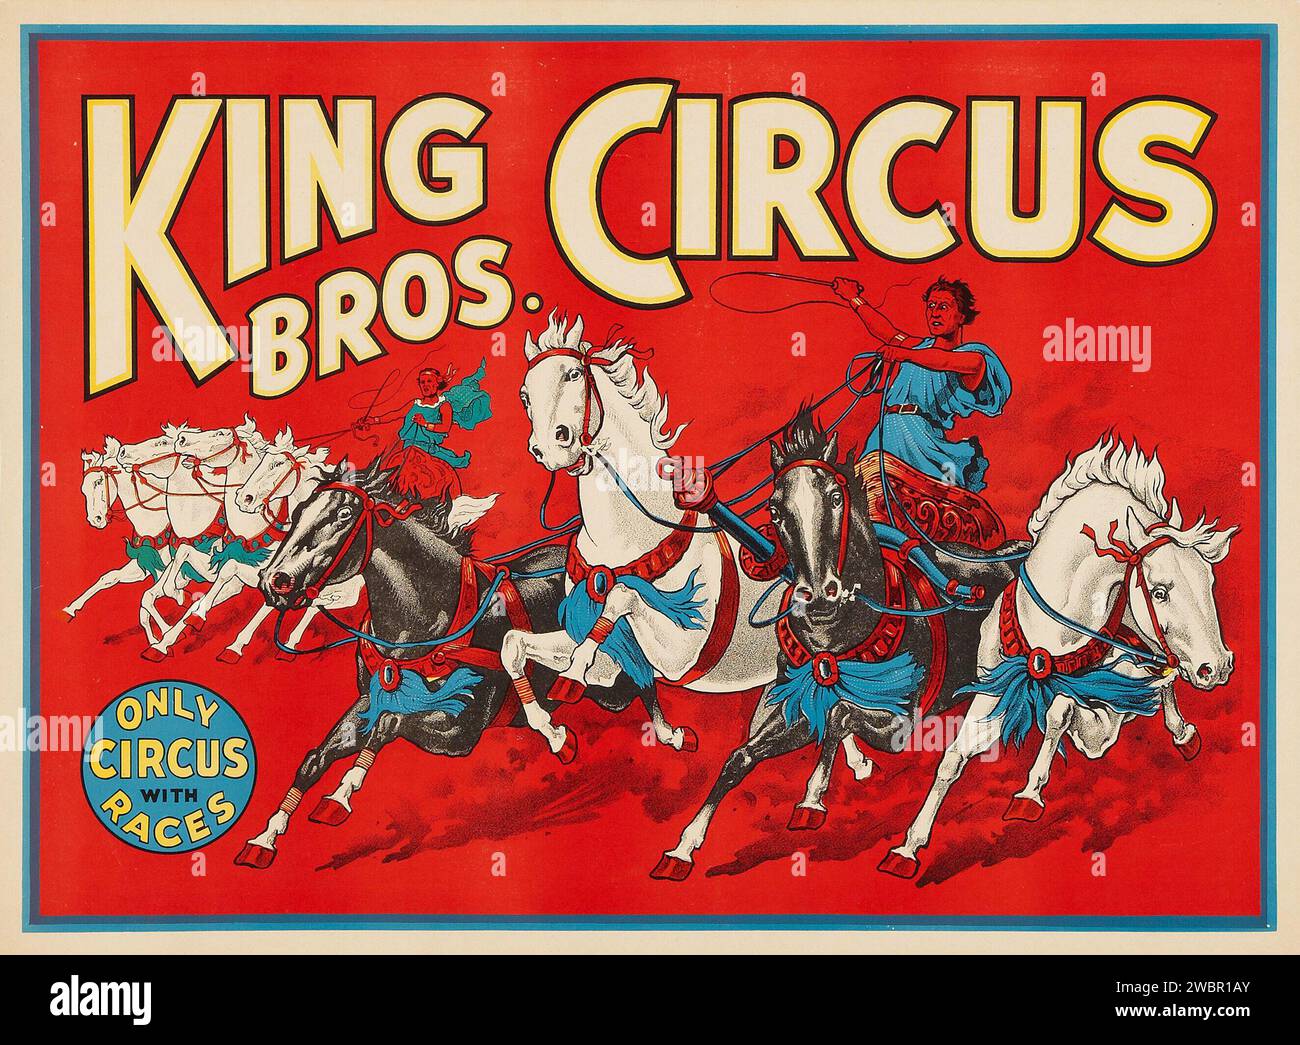 King Bros Circus Poster (c 1940) 'only circus with races' Stock Photo